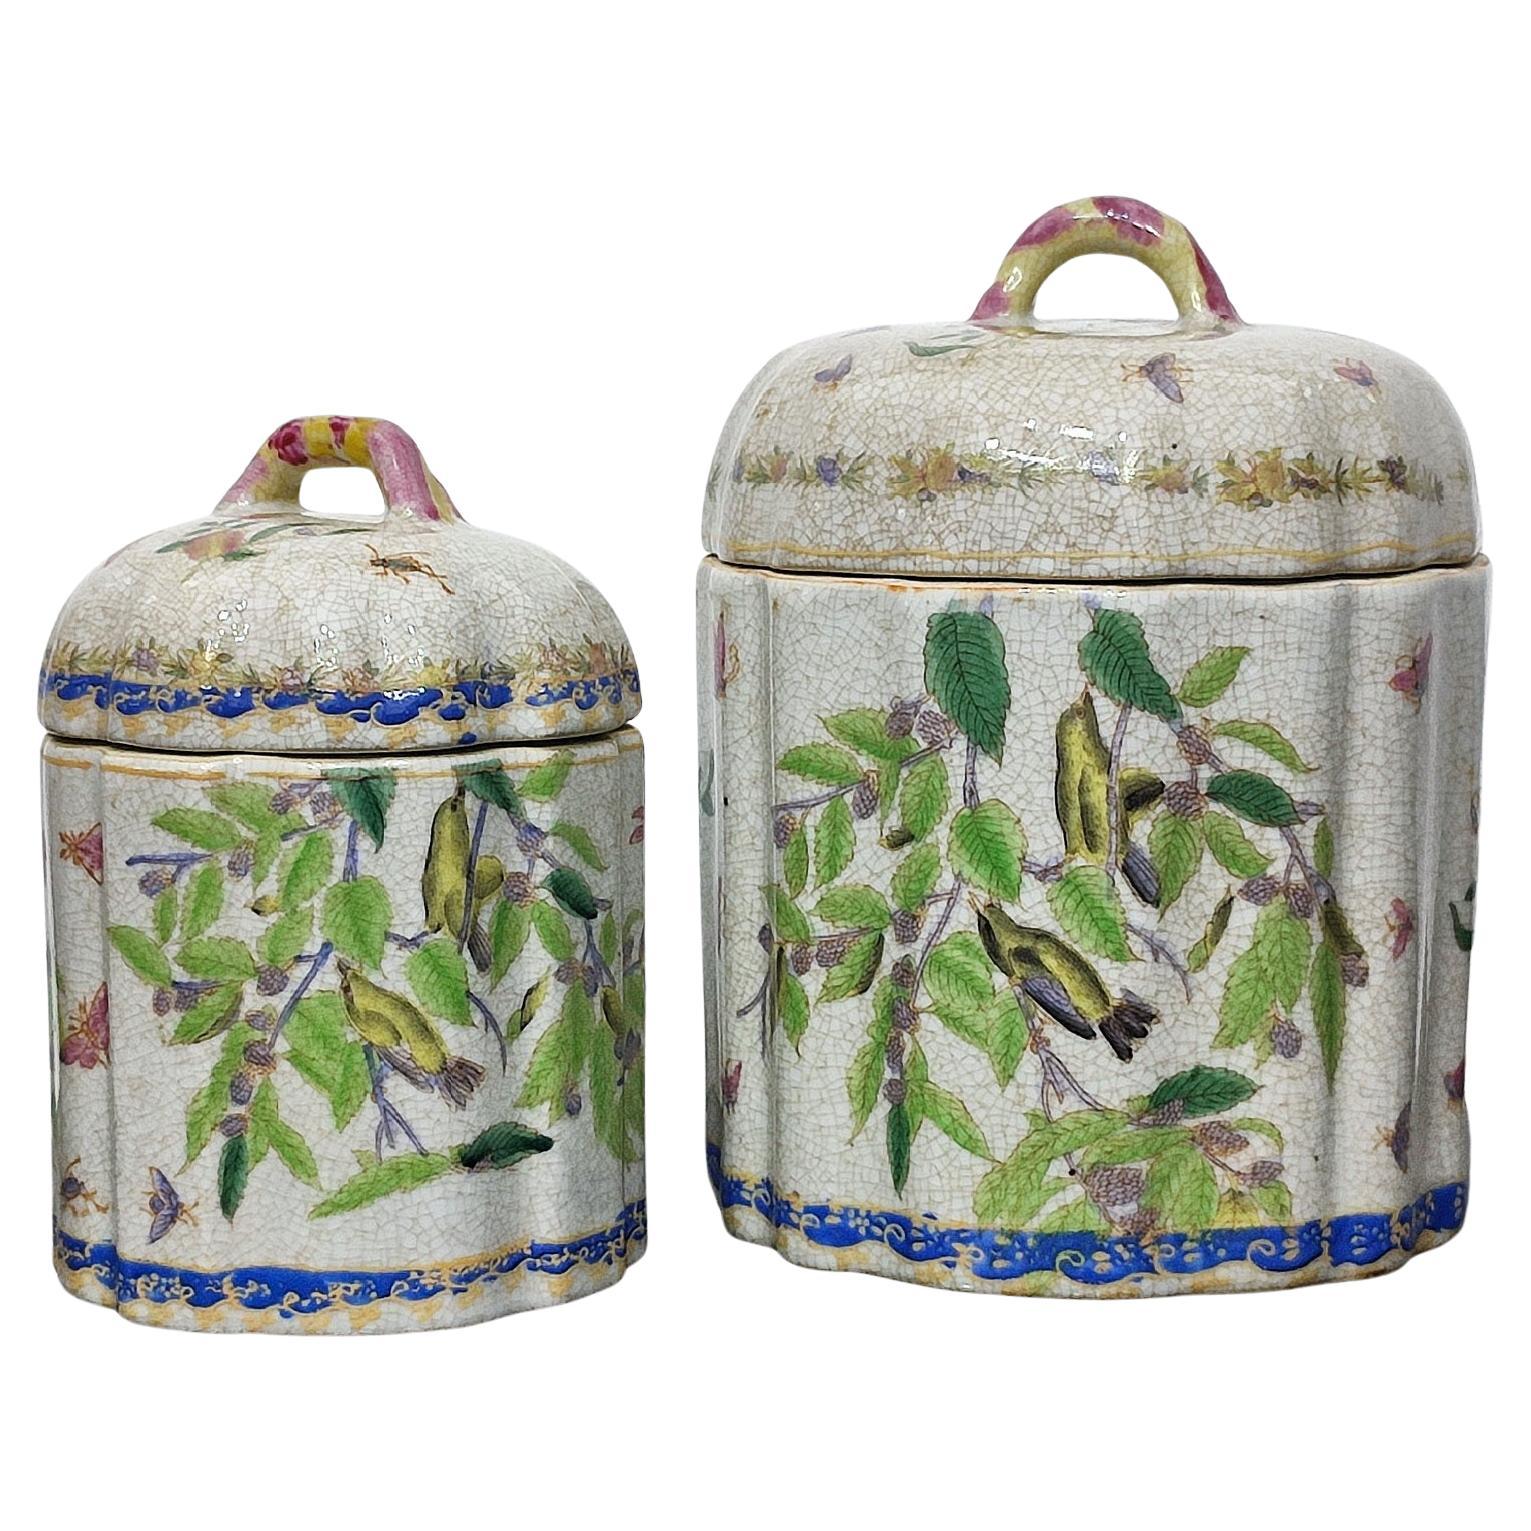 https://a.1stdibscdn.com/pair-of-craqueled-ceramic-lidded-jars-vintage-from-the-1990s-for-sale/f_9804/f_317444421671060220109/f_31744442_1671060220639_bg_processed.jpg